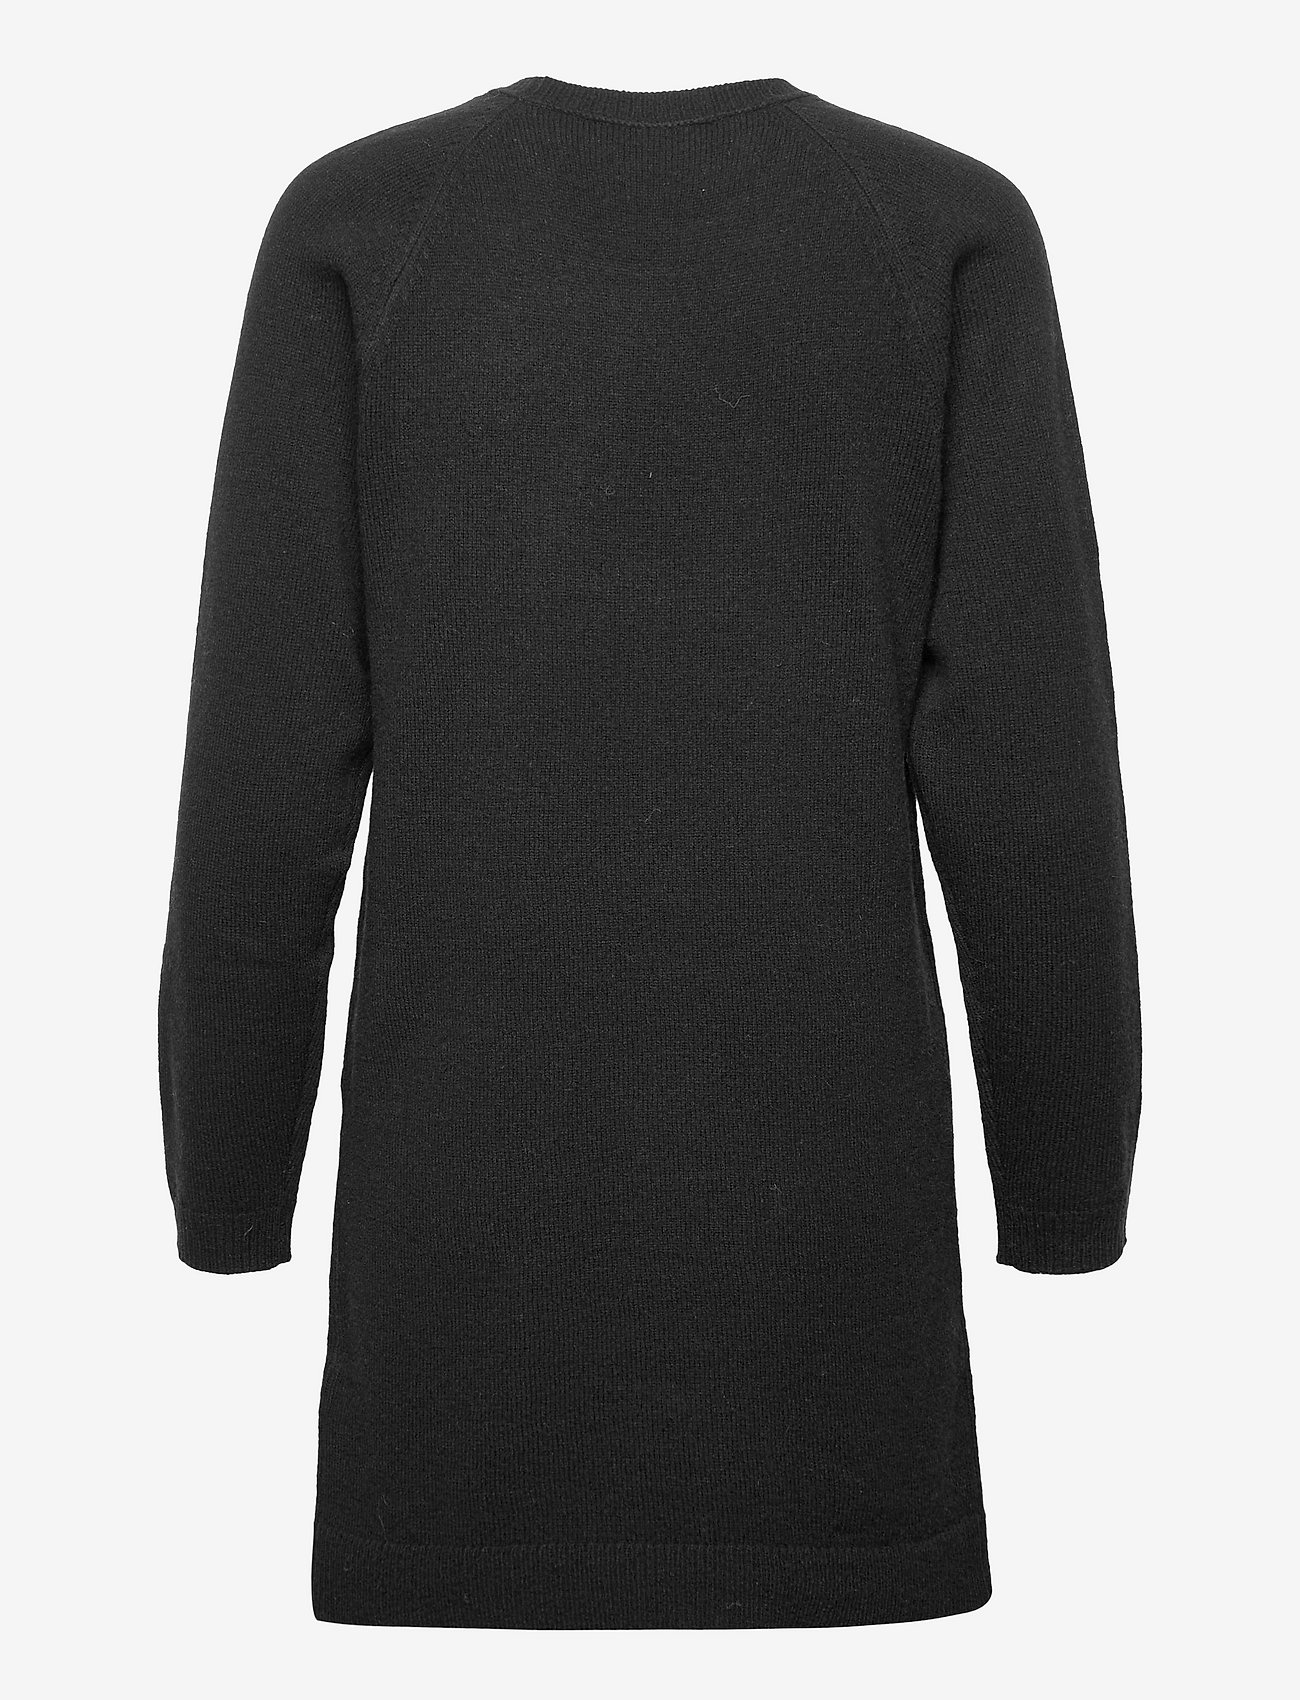 Double A by Wood Wood - Anne lambswool dress - strikkjoler - black - 1